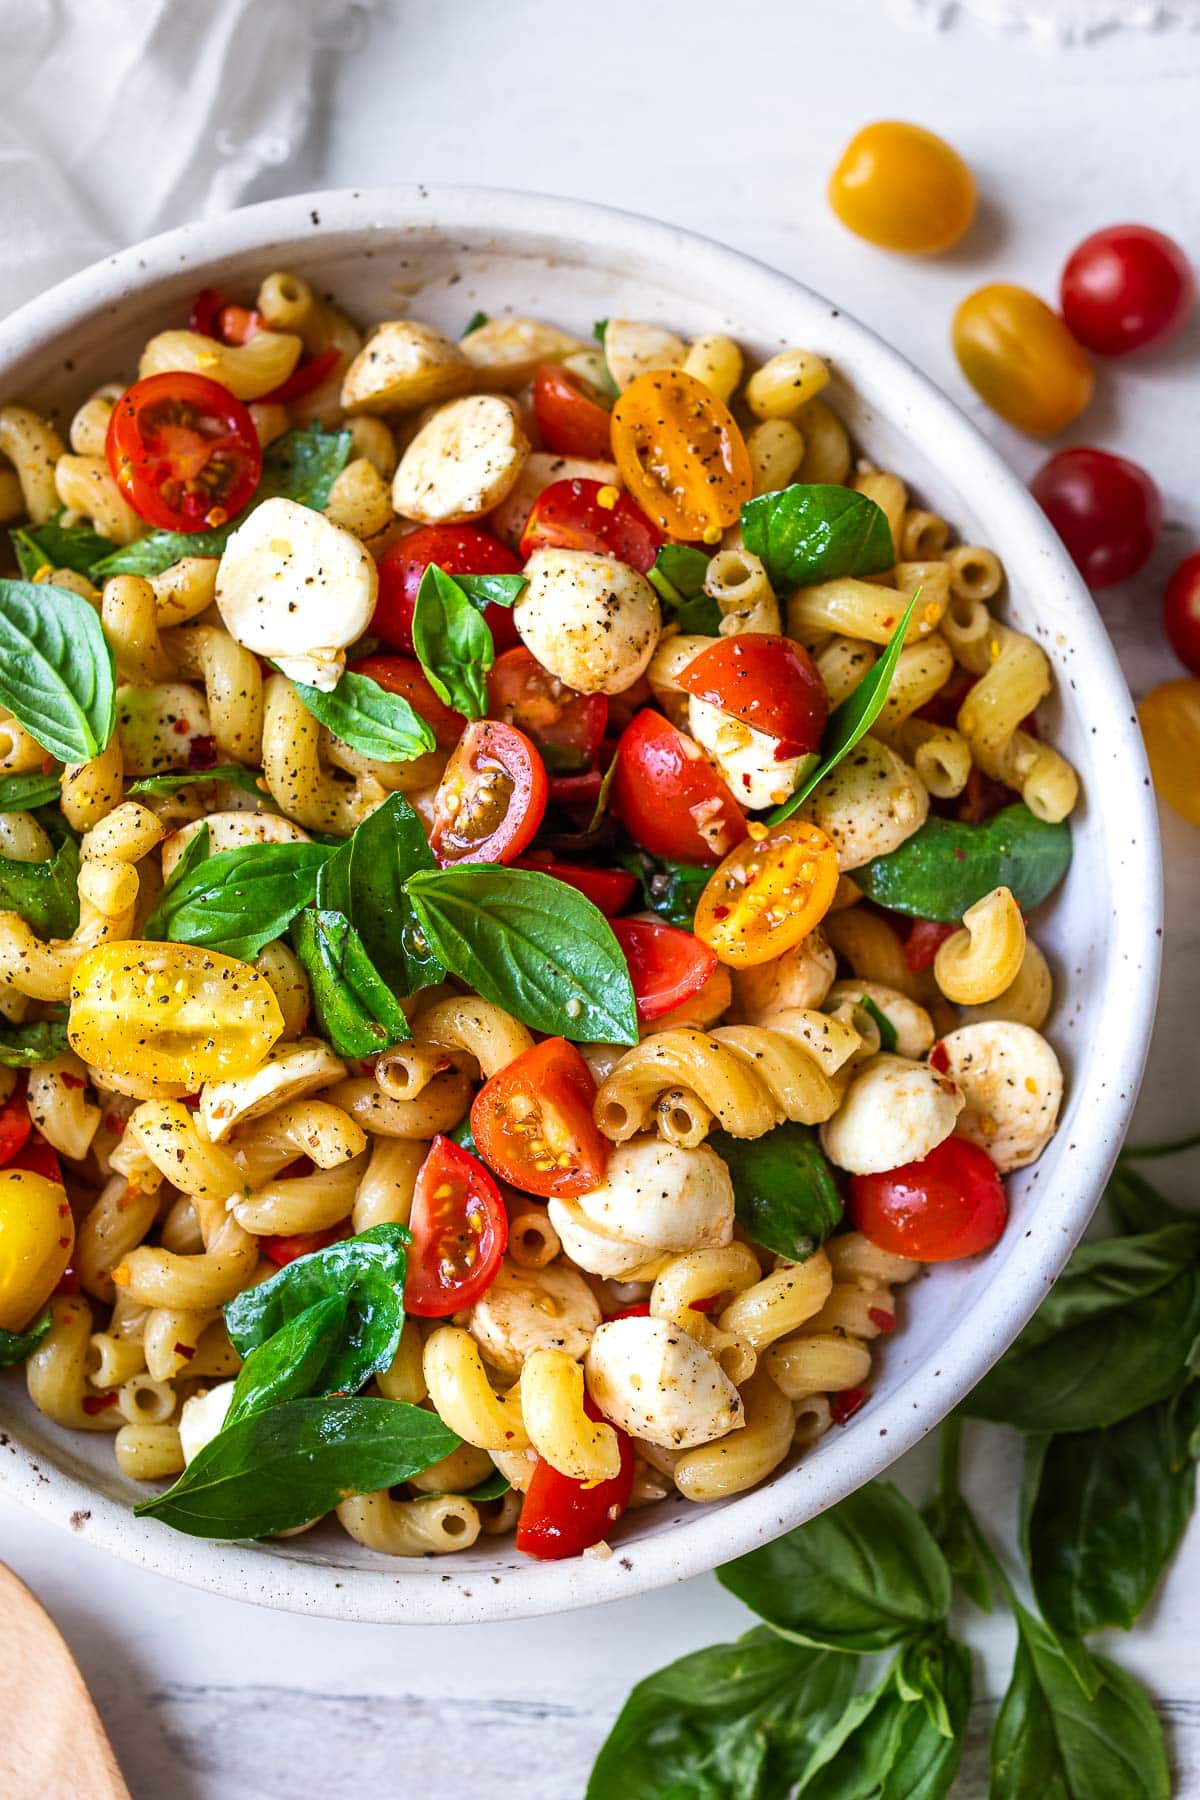 An easy-to-make summertime favorite, Caprese Pasta Salad is always a hit! Simple ingredients, quick to make, and oh-so-good!